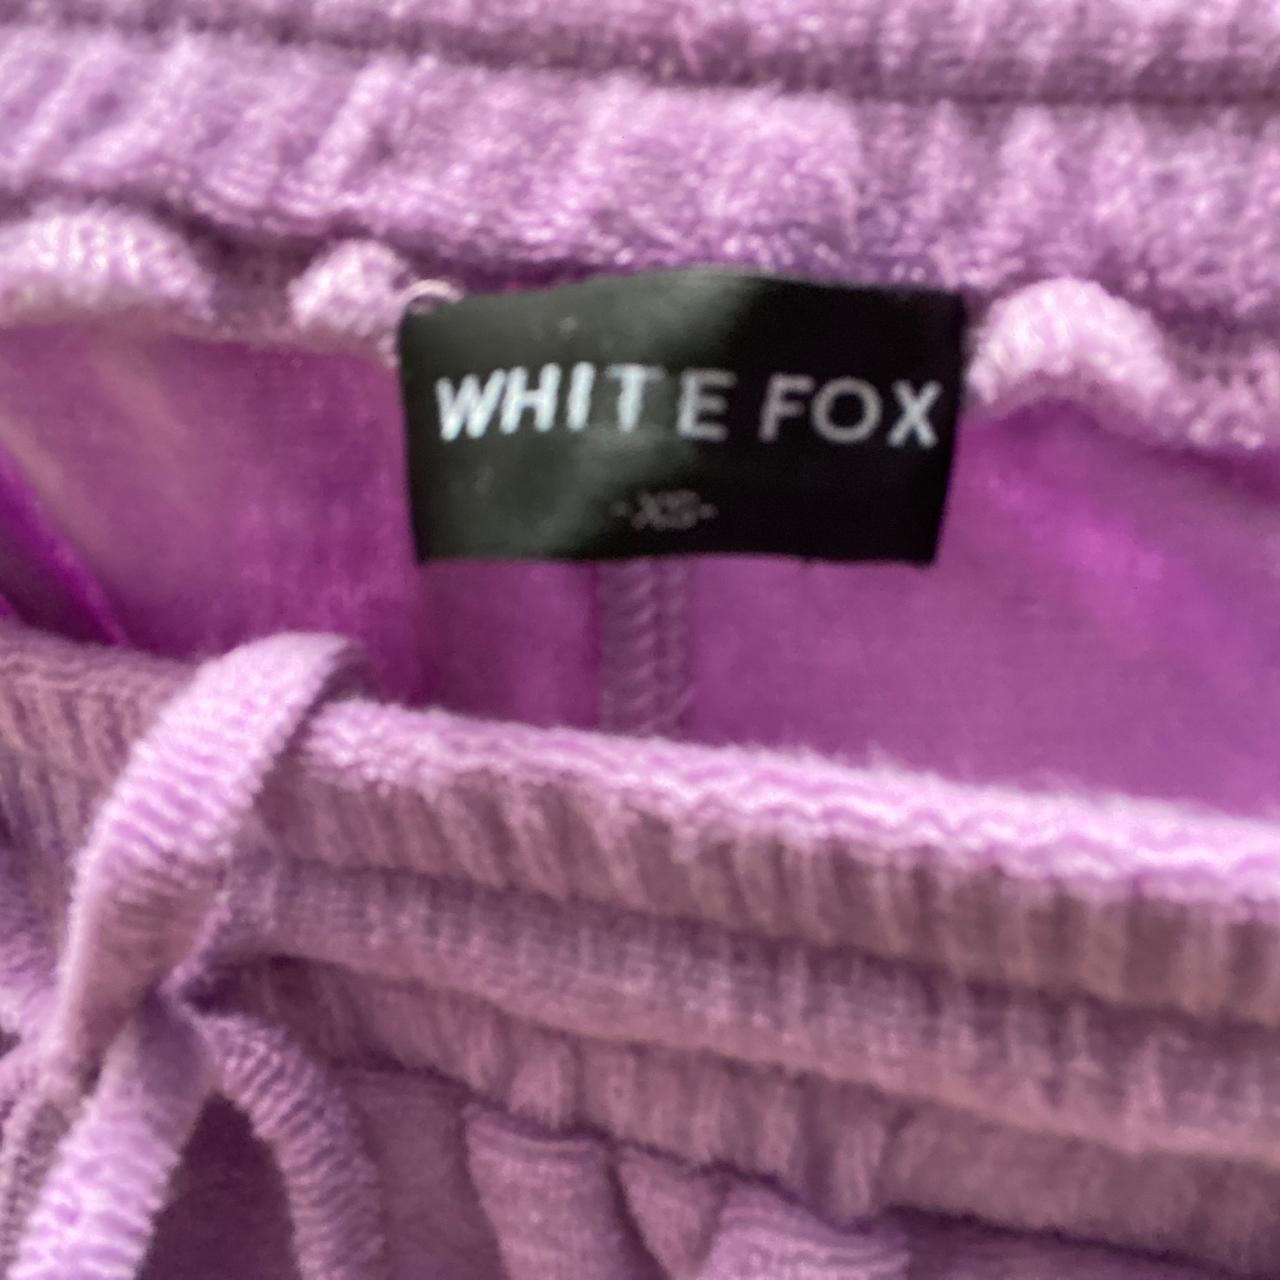 THE LAVENDER WHITE FOX SHORTS These towel-style... - Depop